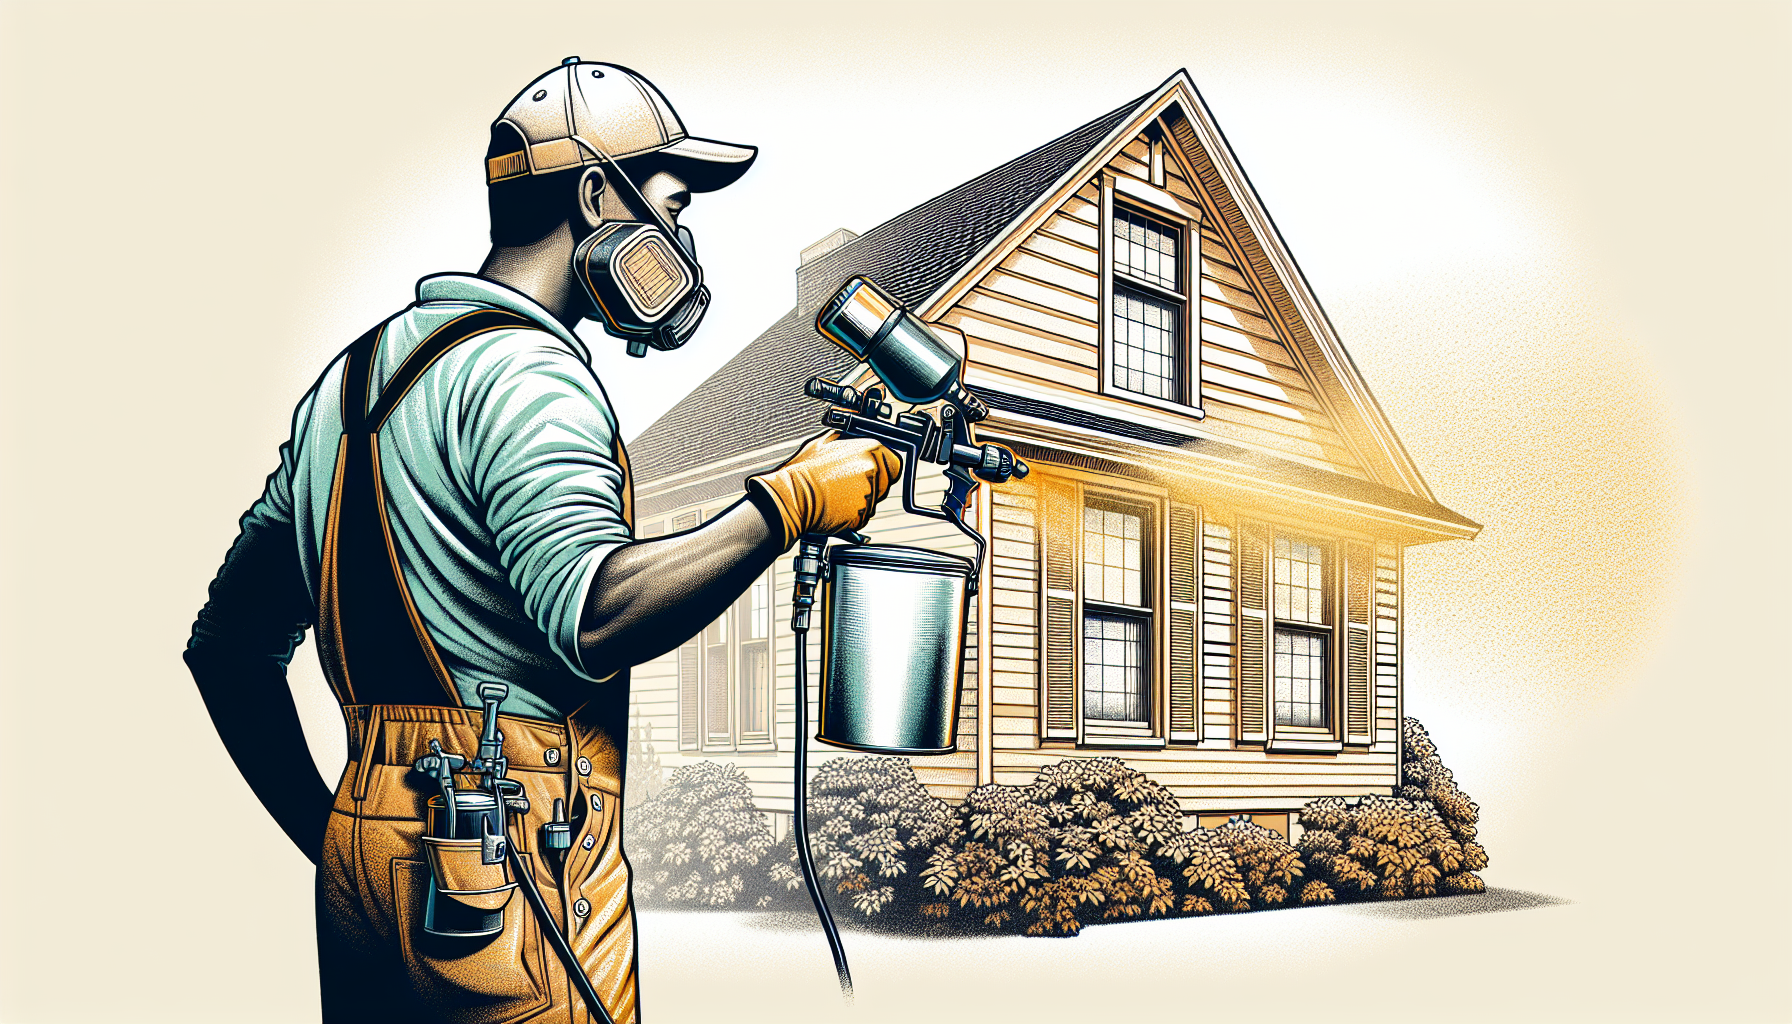 Illustration of a house with vinyl siding being painted